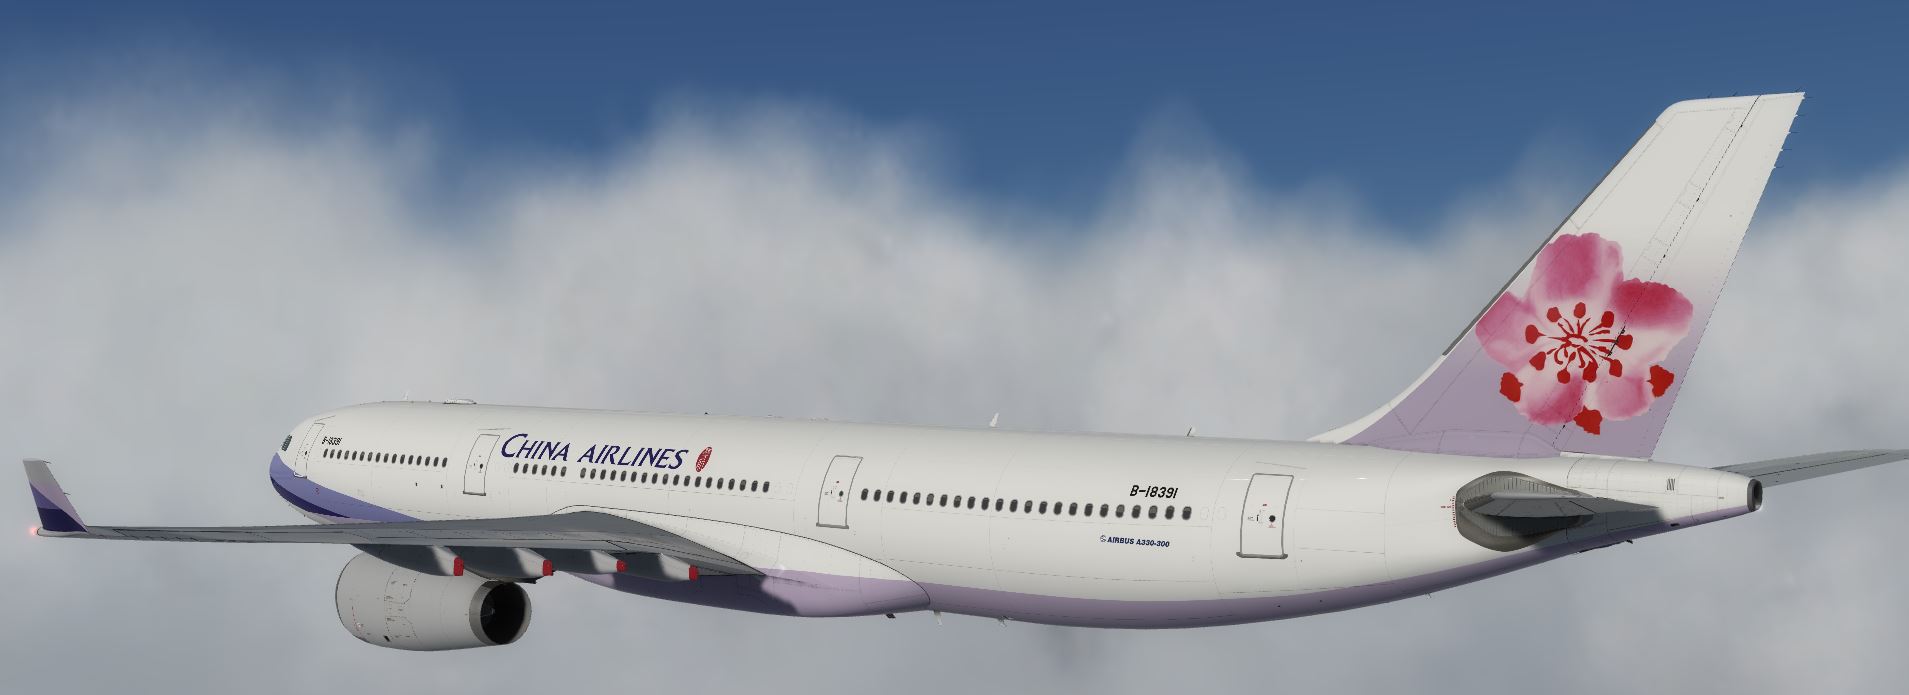 AS A330 ChinaAirline-4273 